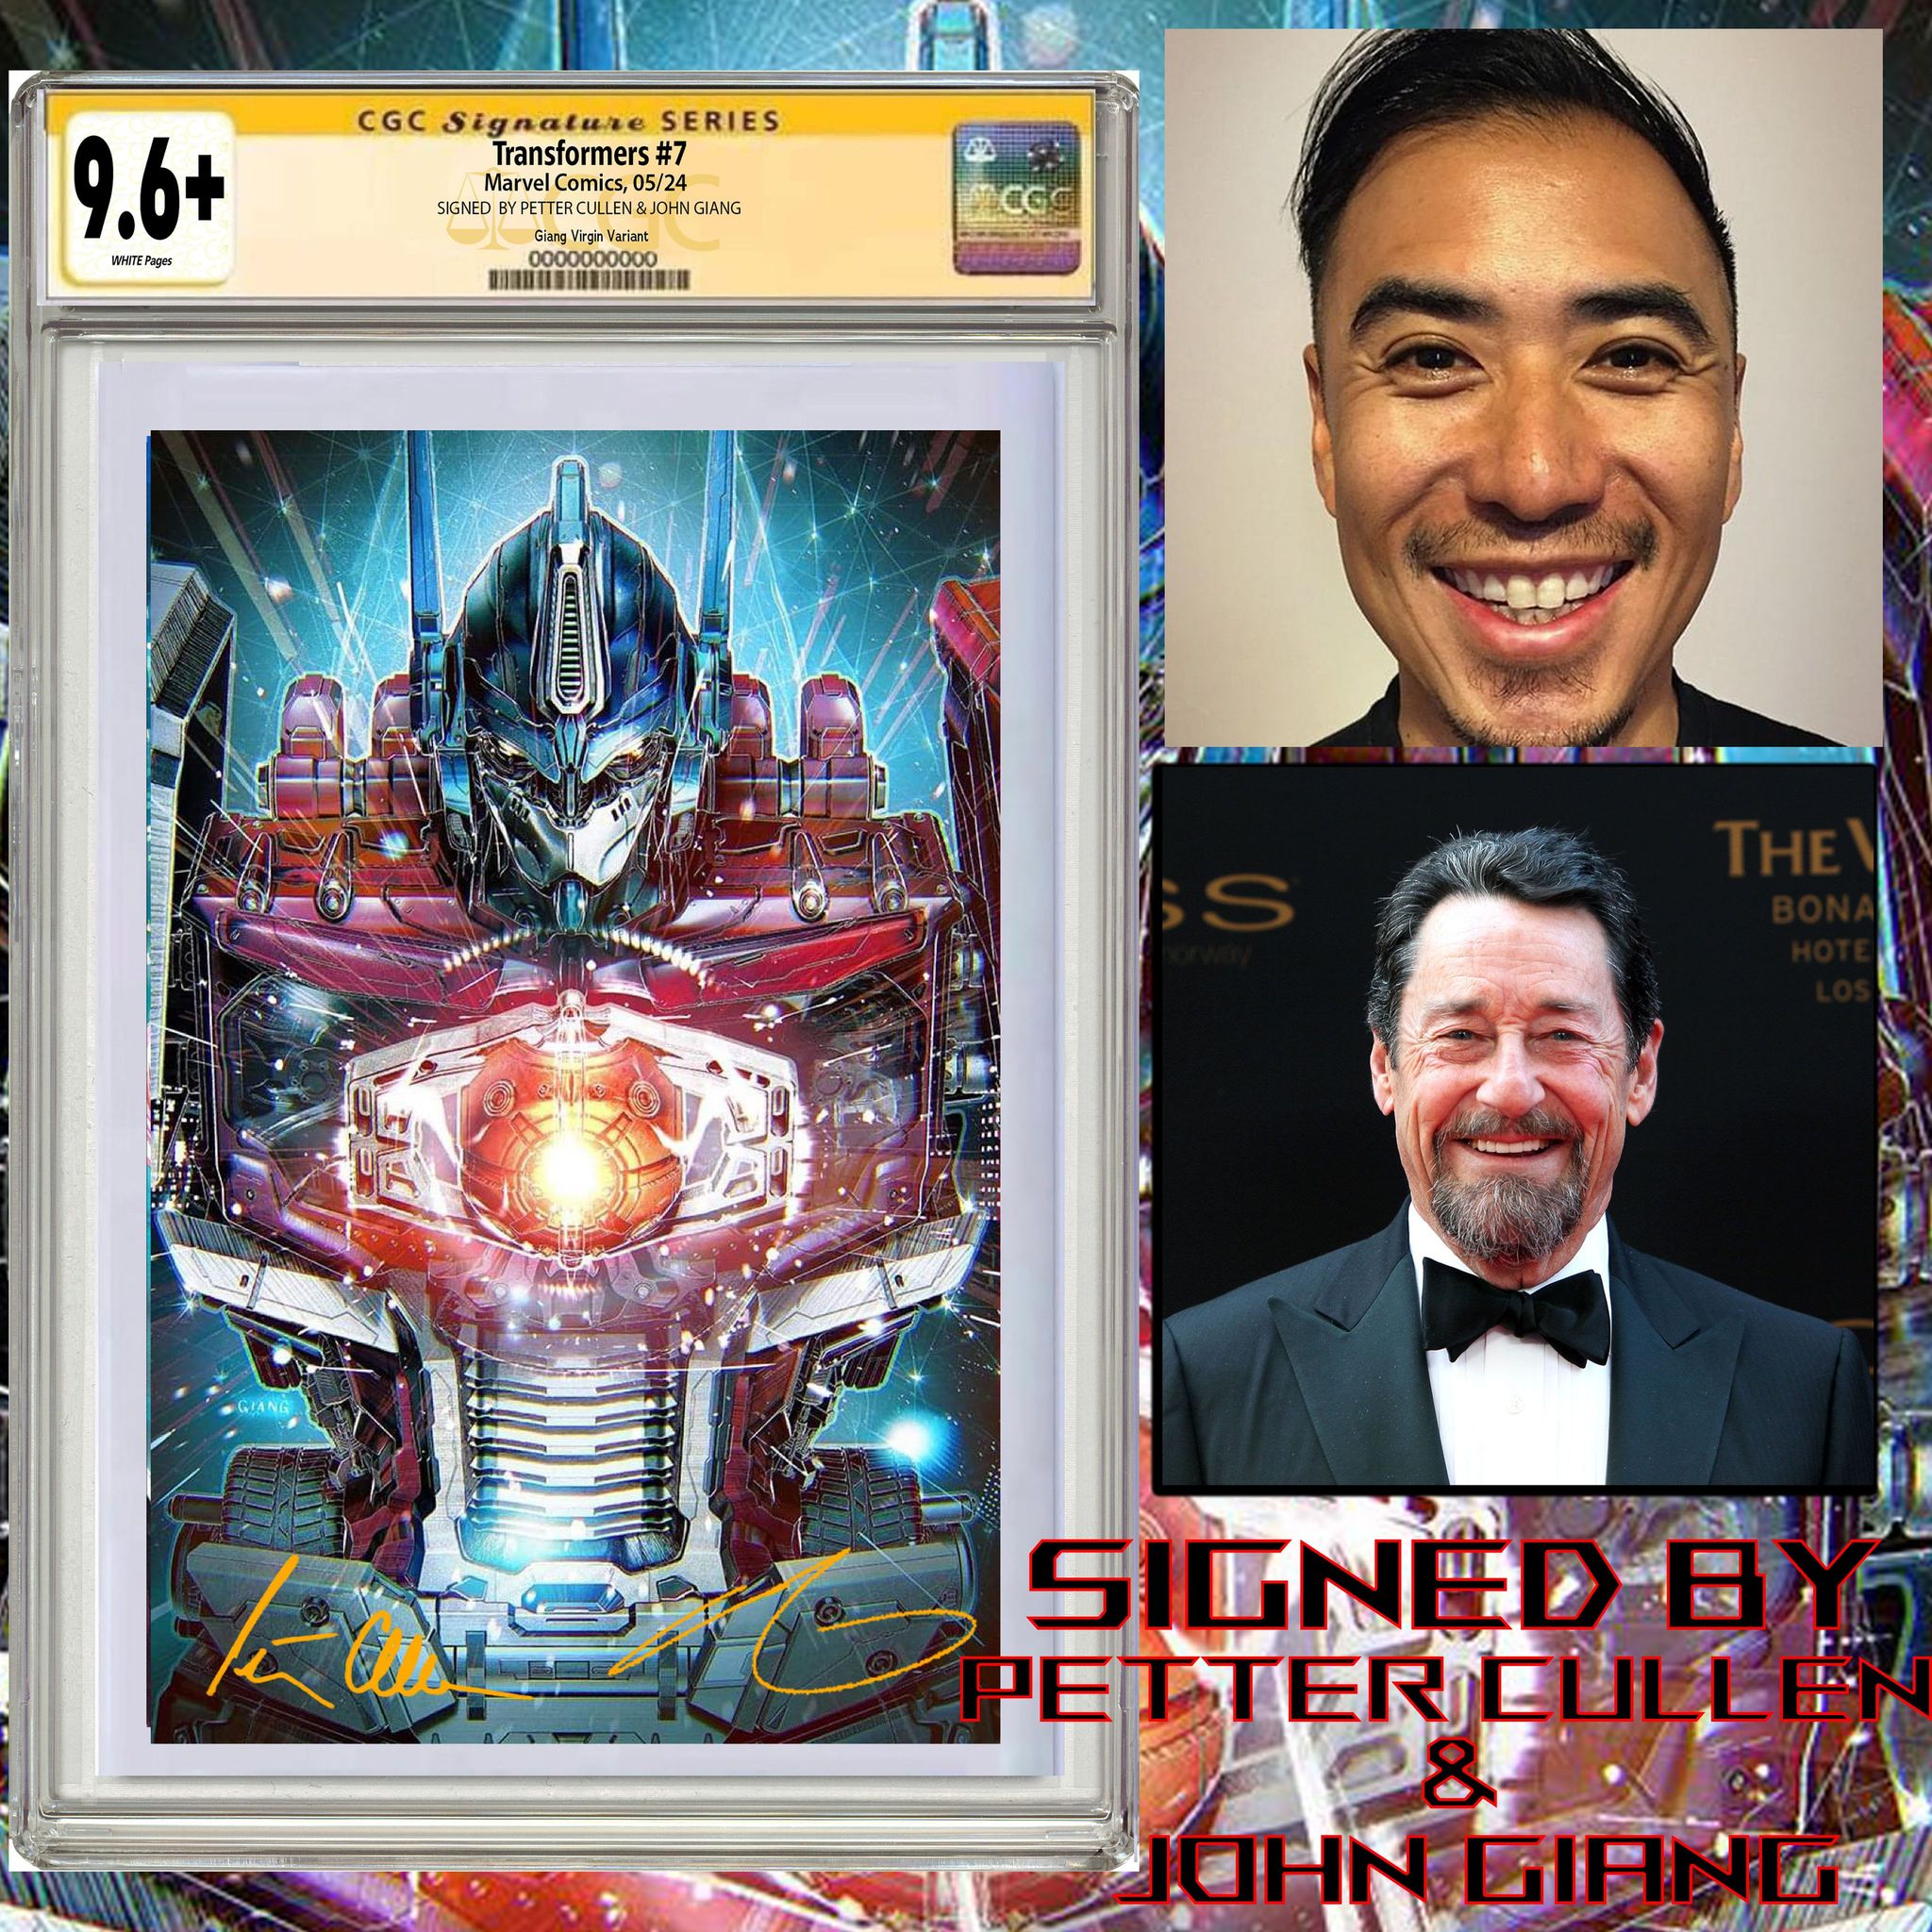 TRANSFORMERS #7 PETER CULLEN & JOHN GIANG SIGNATURE SERIES OPPORTUNITY